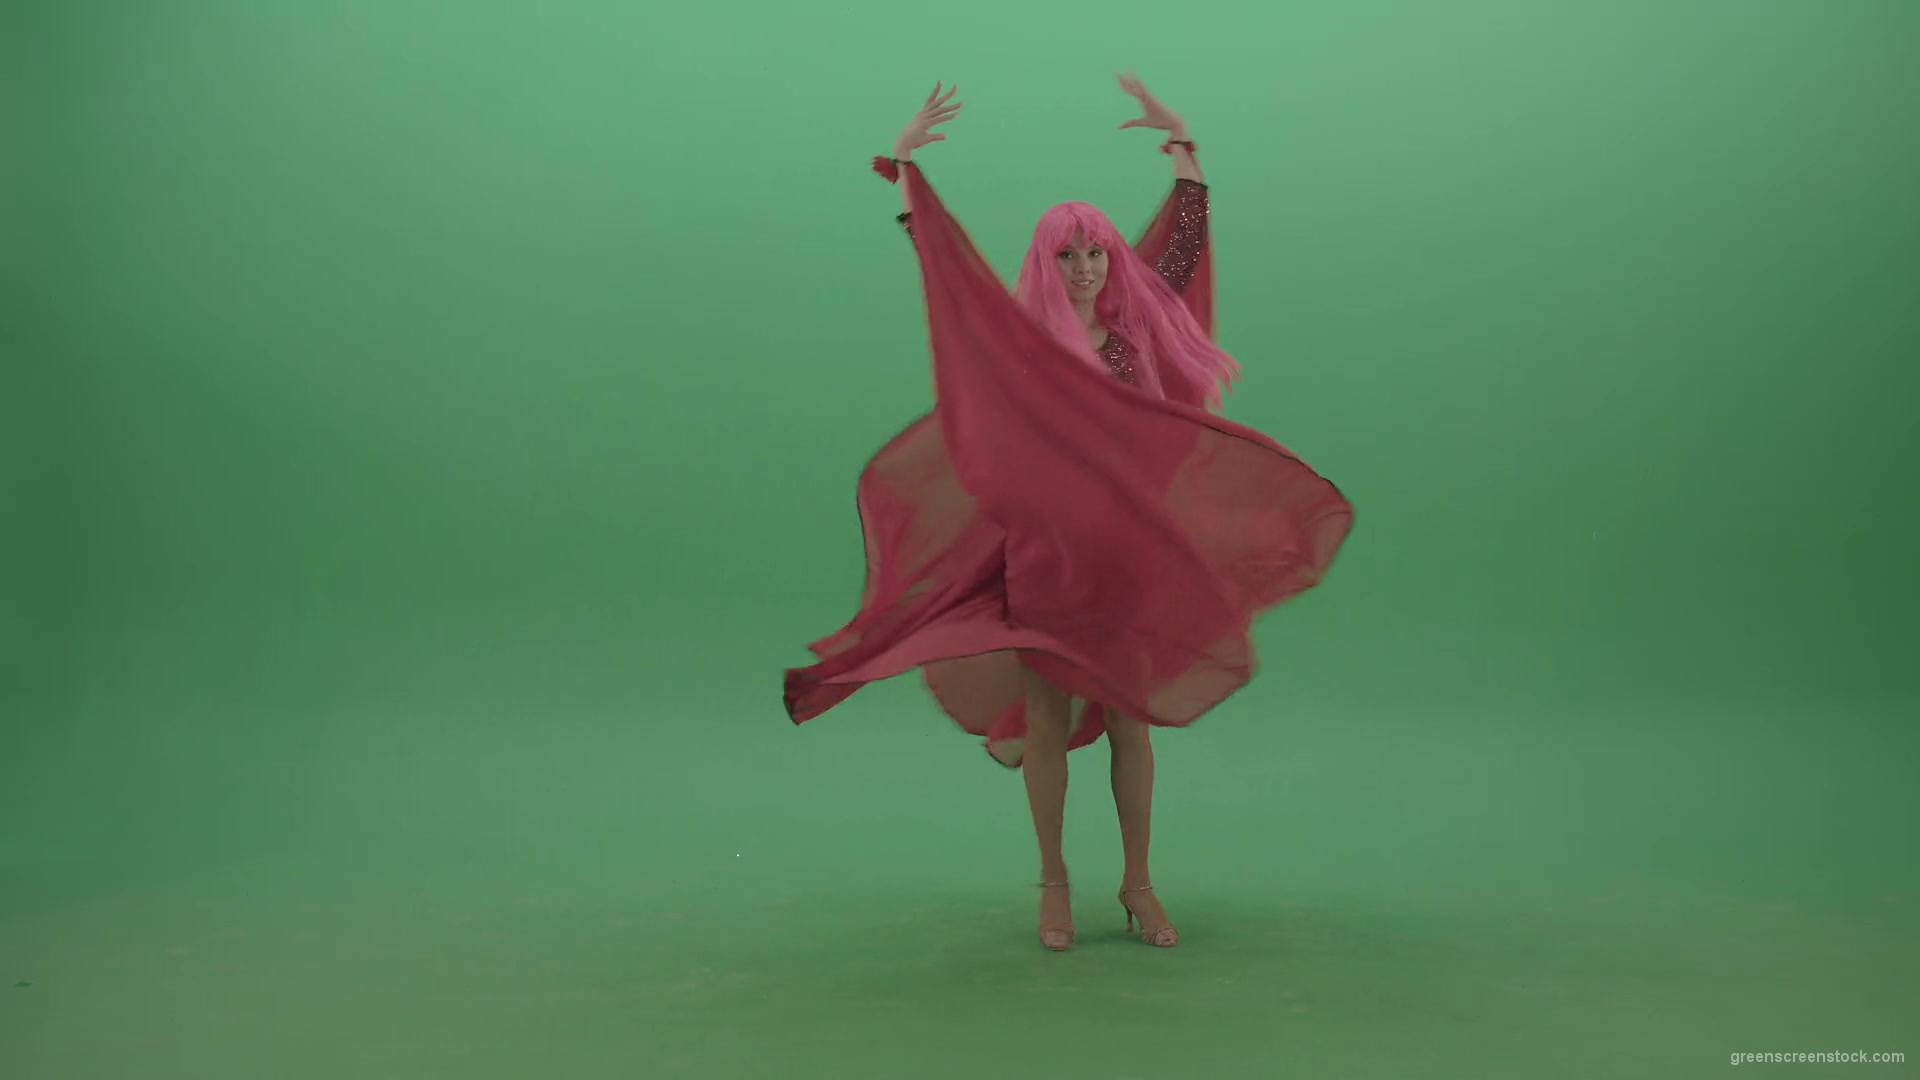 Beautiful-girl-in-red-dress-and-pink-hair-dancing-flamenco-and-spinning-on-green-screen-4K-Video-Footage-1920_008 Green Screen Stock